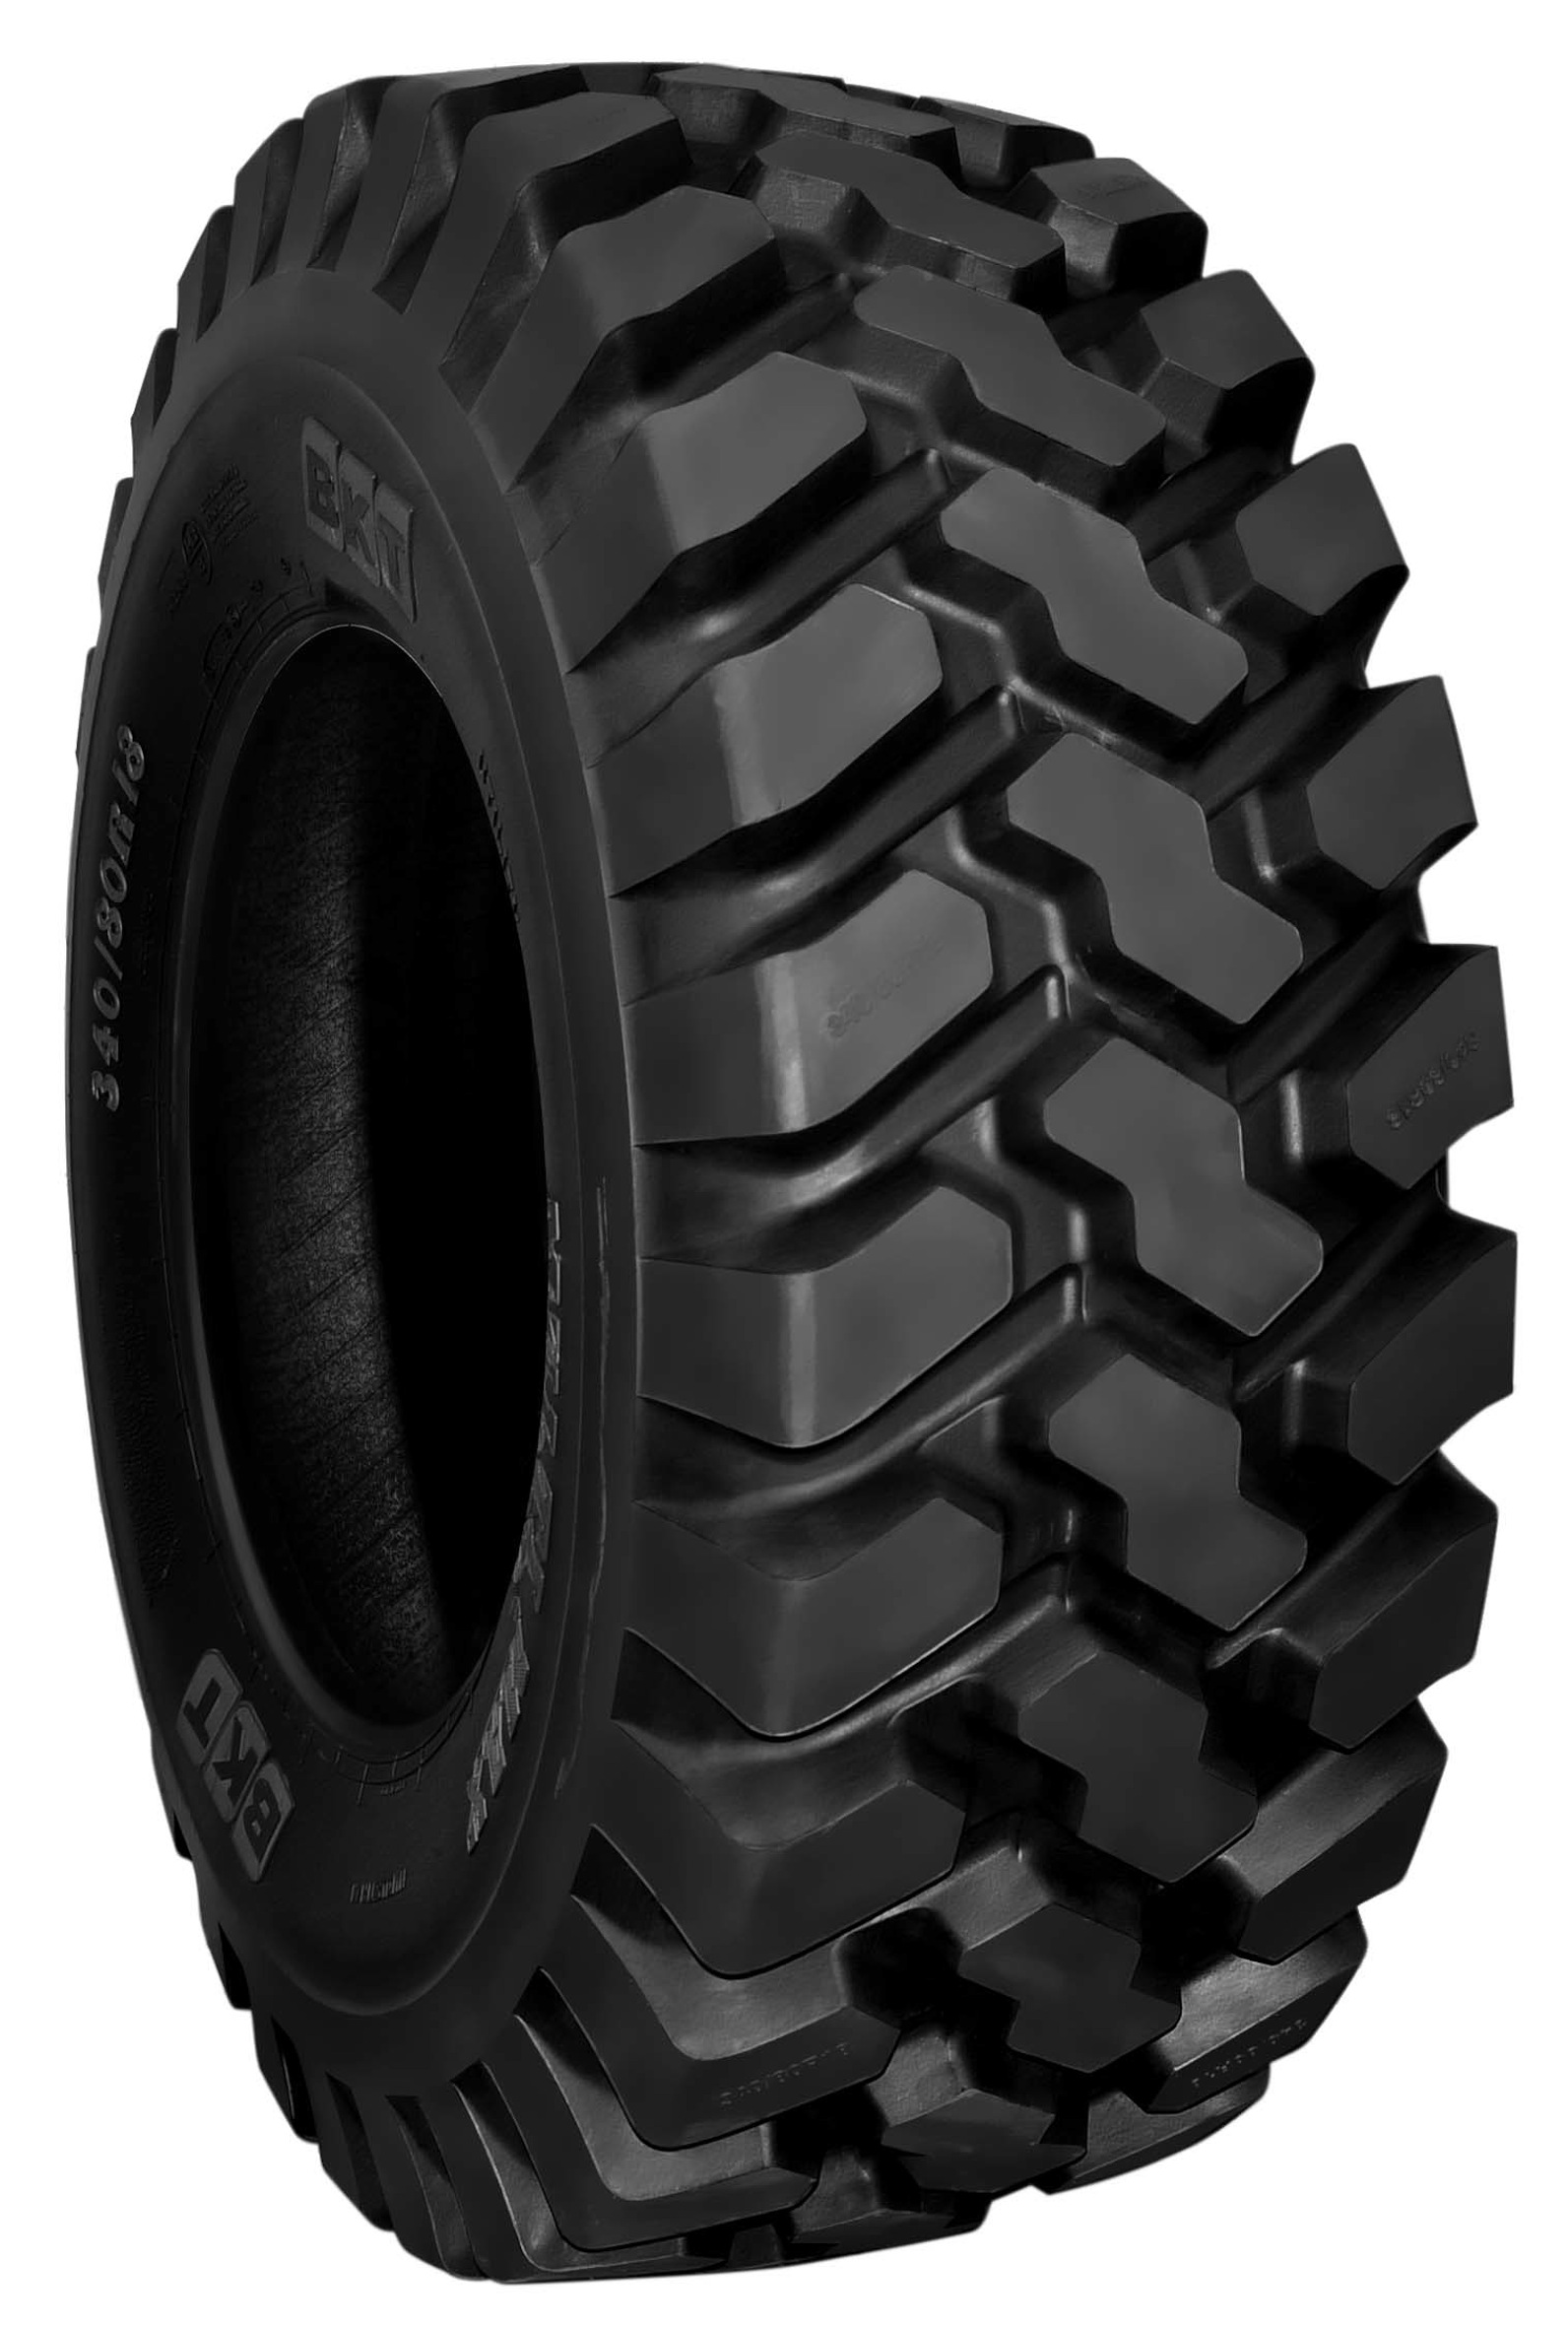 BKT to Present new Multimax Tire at EIMA 2016